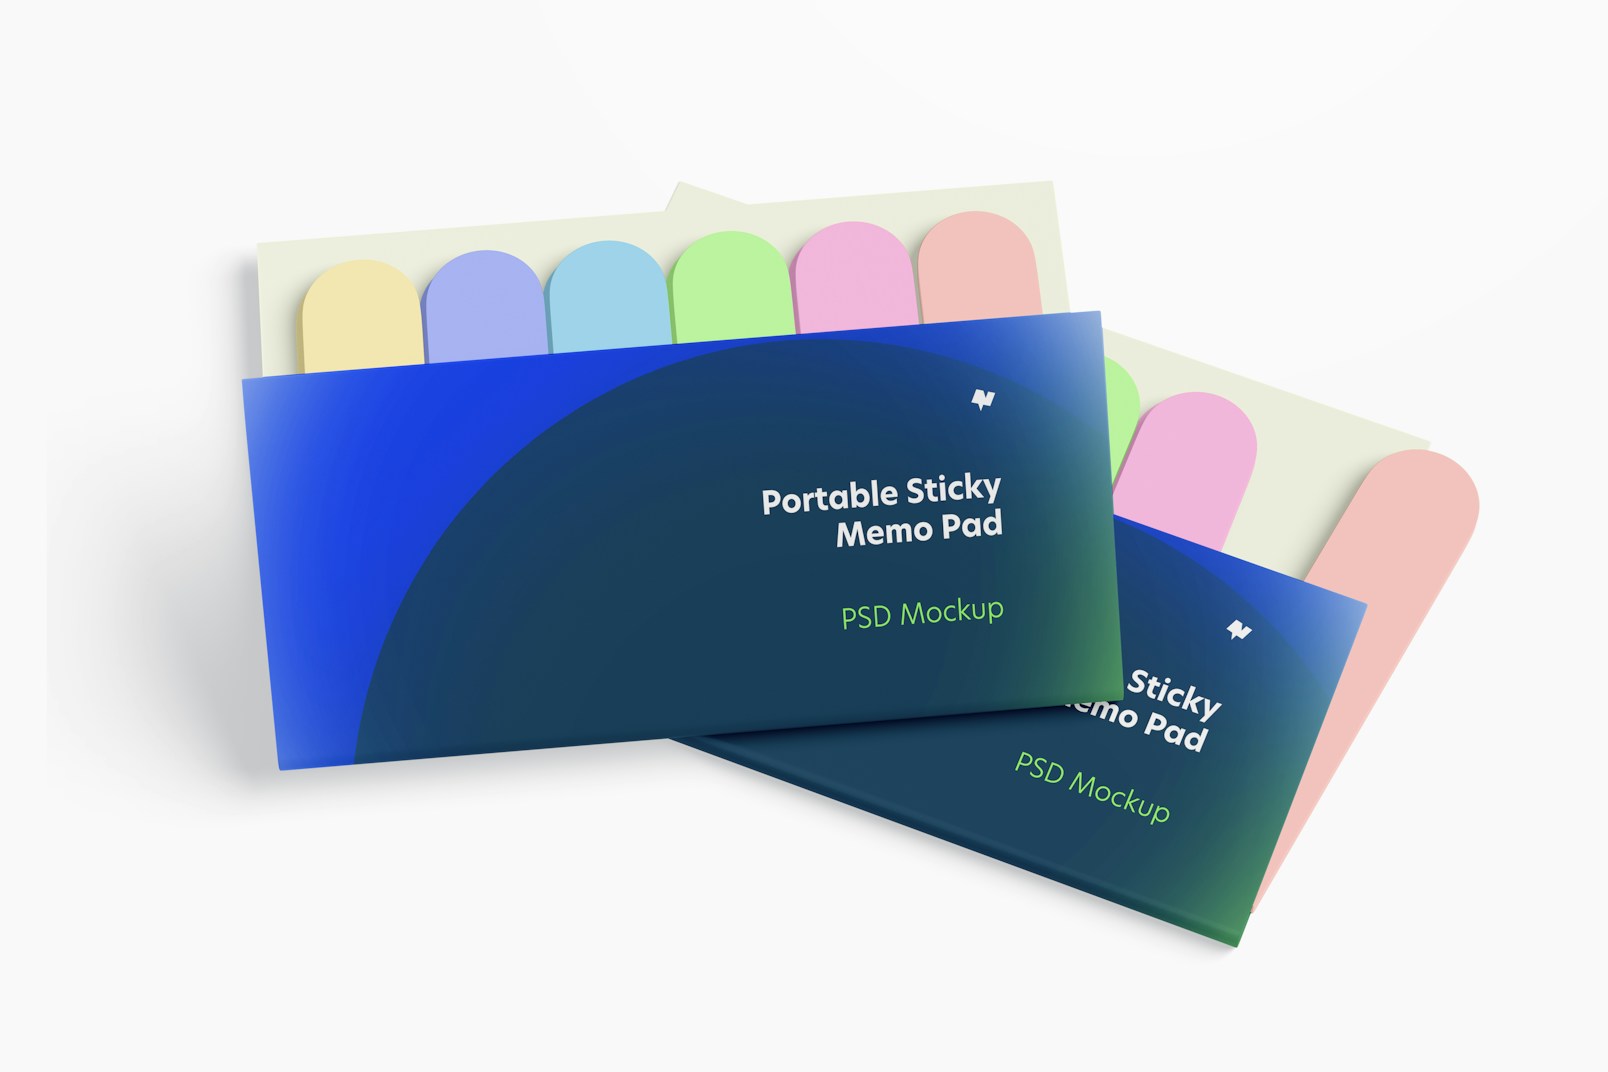 Portable Sticky Memo Pads Mockup, Stacked